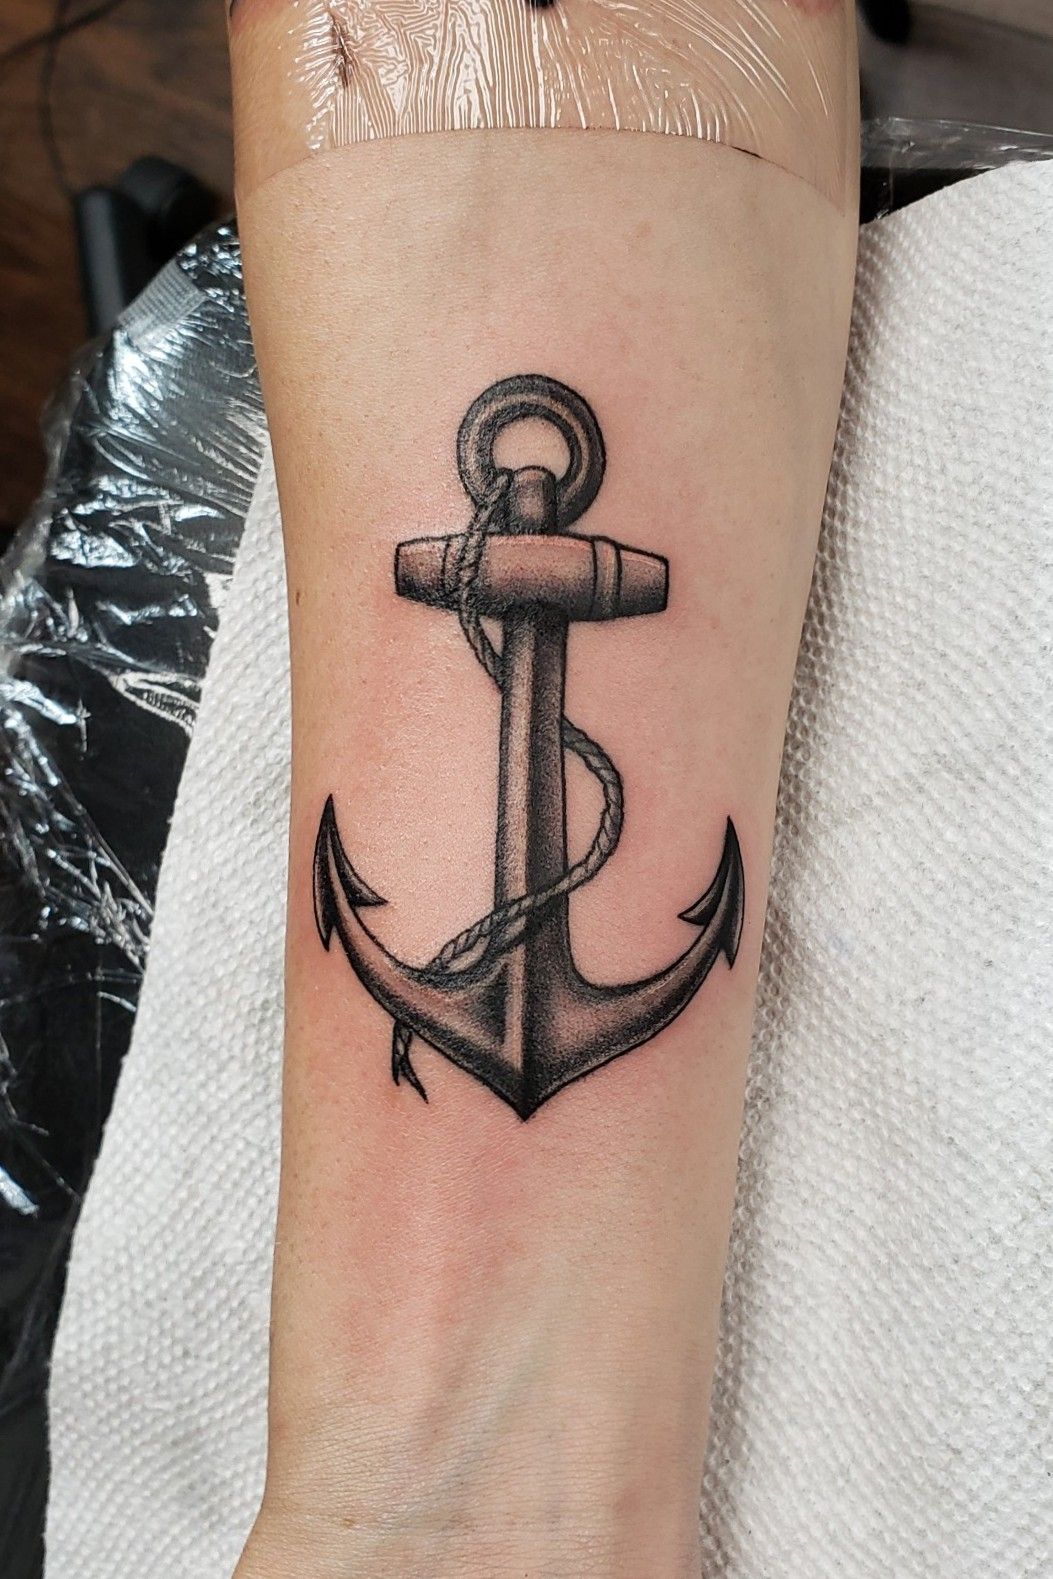 Buy Anchor set of 2 Temporary Tattoo Online in India - Etsy